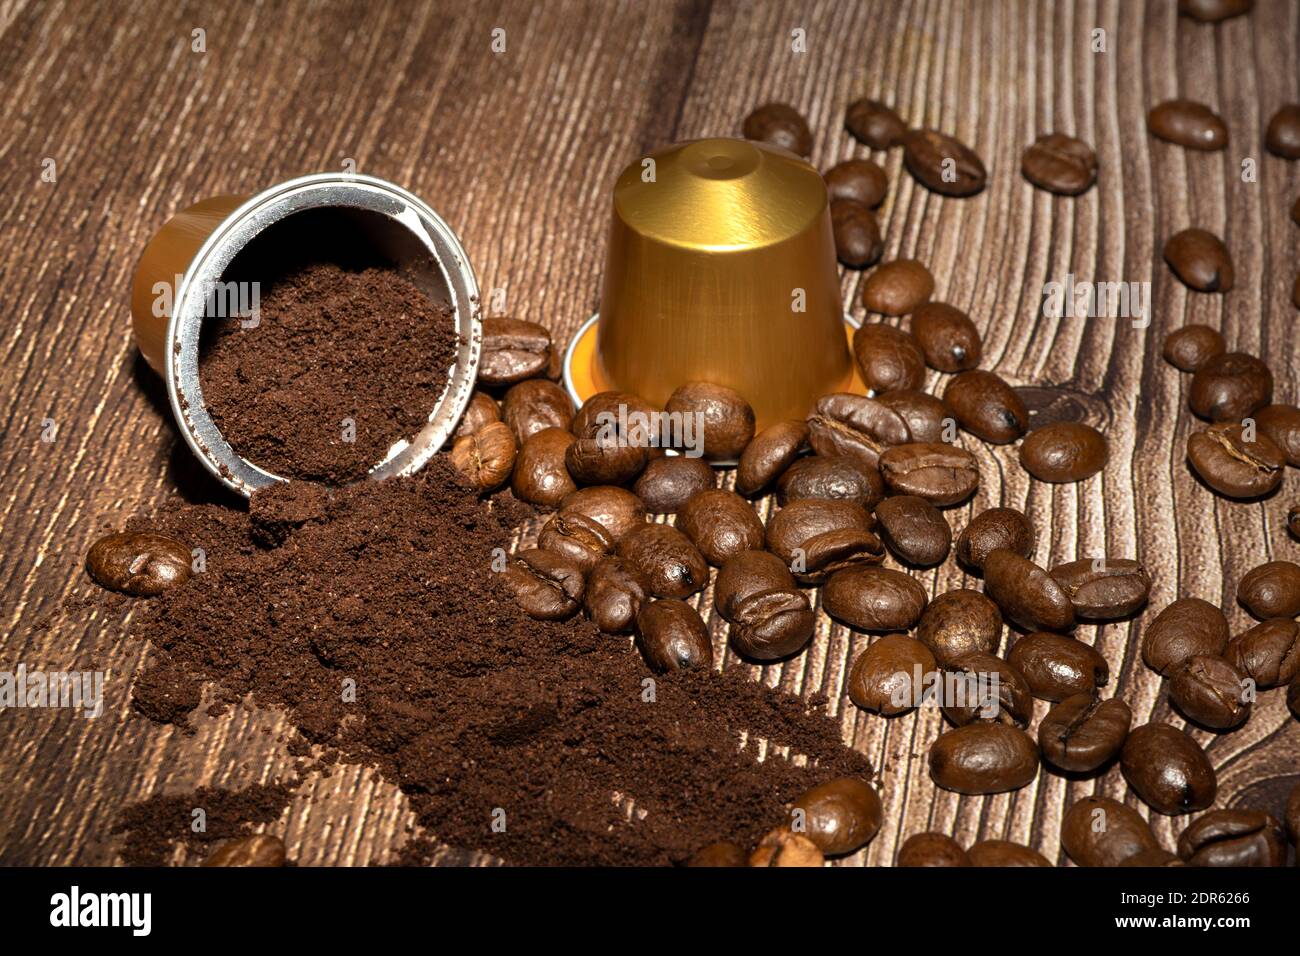 Citron skuffet Spændende Open Espresso coffee capsule with grounded coffee inside. Coffee pods and  roasted coffee beans on wooden background. High quality photo Stock Photo -  Alamy